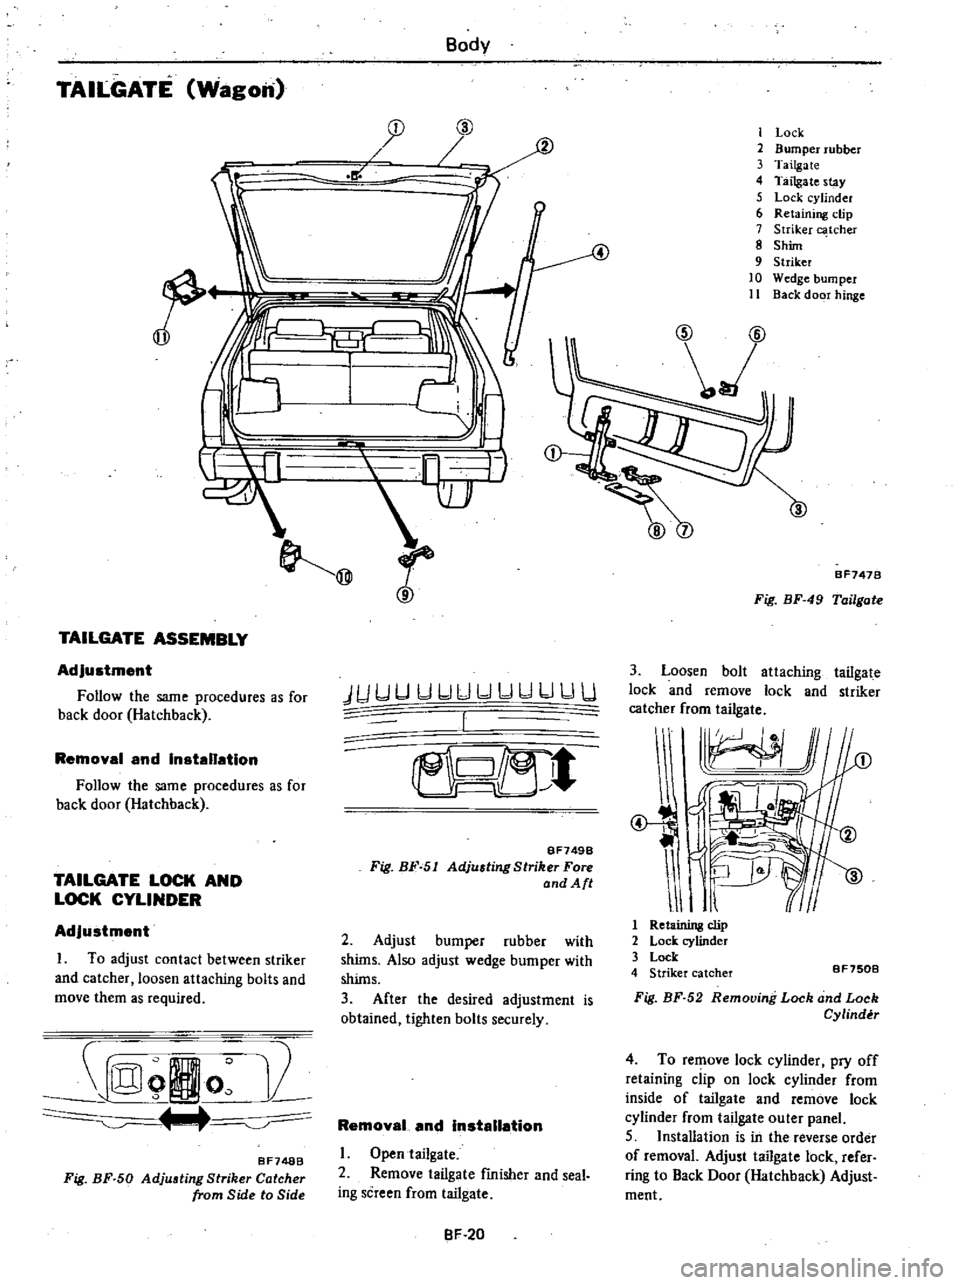 DATSUN 210 1979  Service Manual 
TAILGATE

Wagon 
Body

J

L

il 
@

2

TAILGATE

ASSEMBLY

Adjustment

Follow 
the 
same

procedures 
as 
for

back 
door 
Hatchback

Removal

and 
Installation

Follow 
the 
same

procedures 
as 
fo